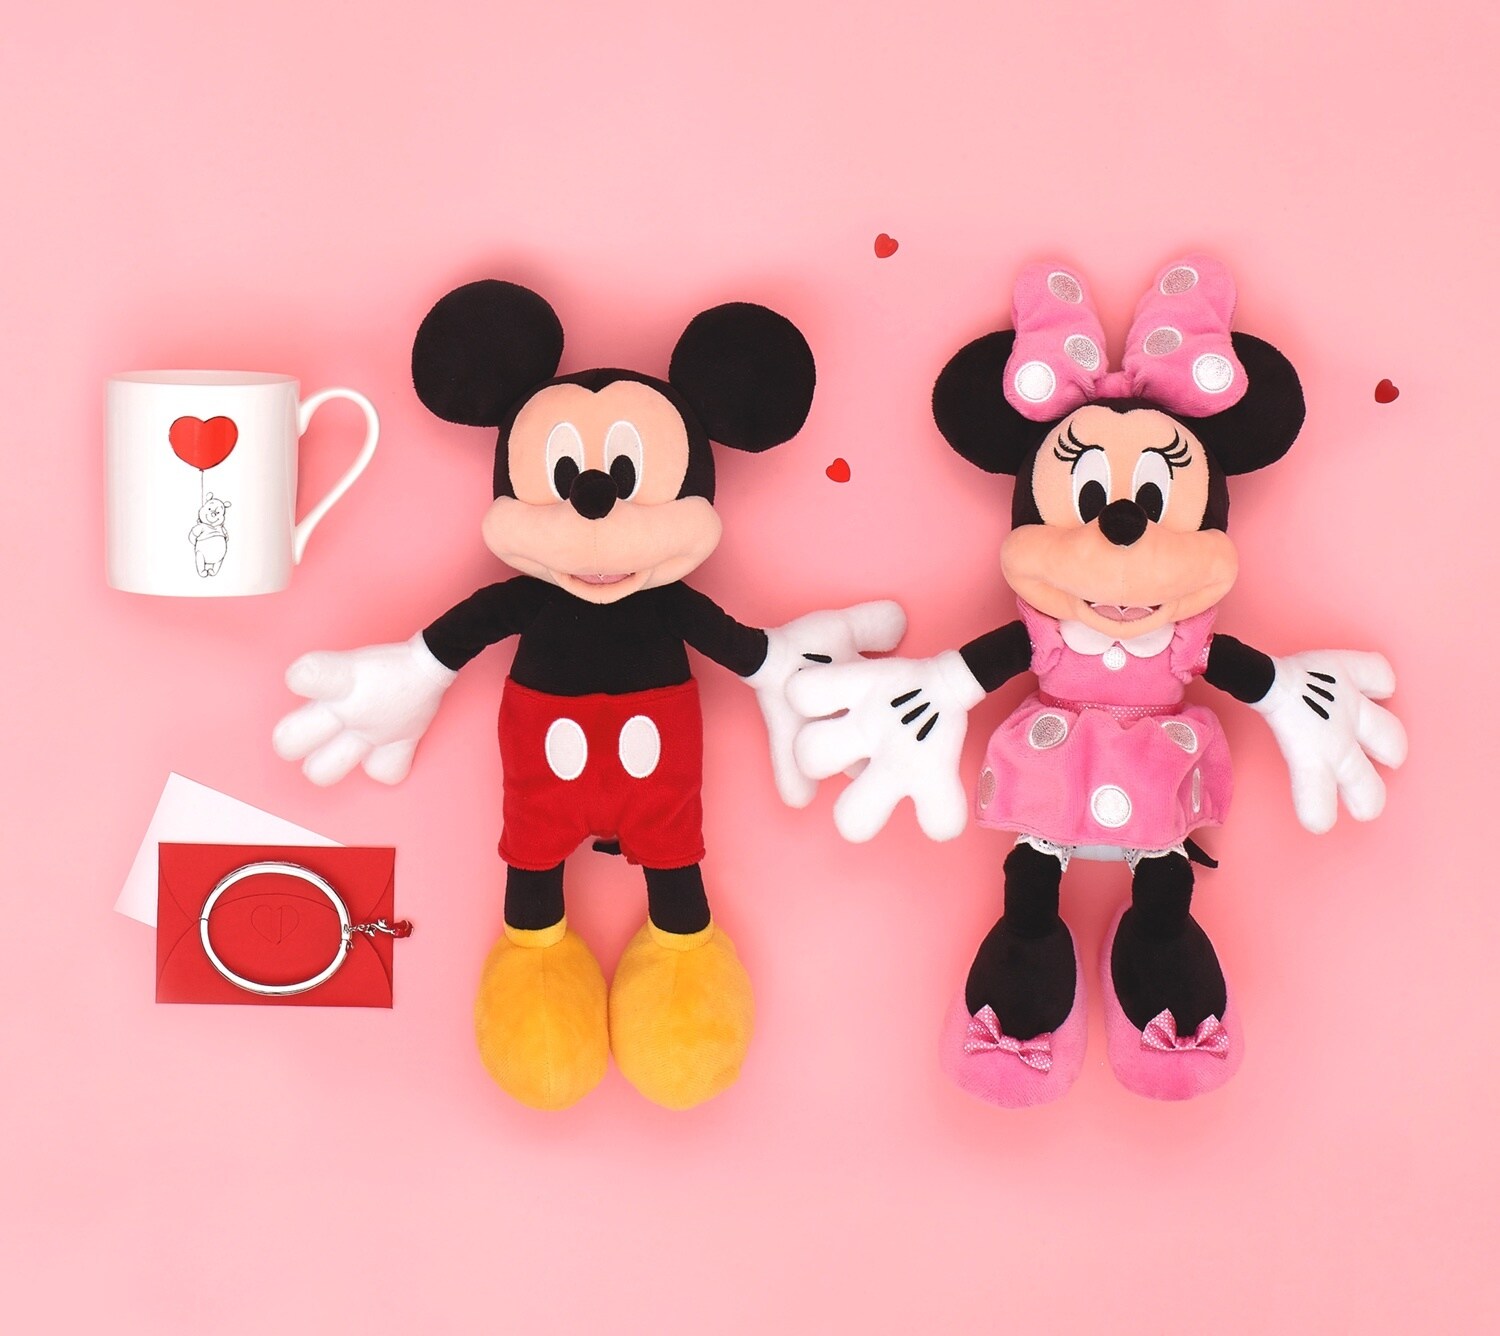 Personalised Presents Gifts For Him Her Husbnd Wife Couples Girlfriend Boyfriend Him Her Wedding Anniversary Valentines Day Christmas Disney Minnie Mickey Prints Posters Wall Art Special Unique Idea 